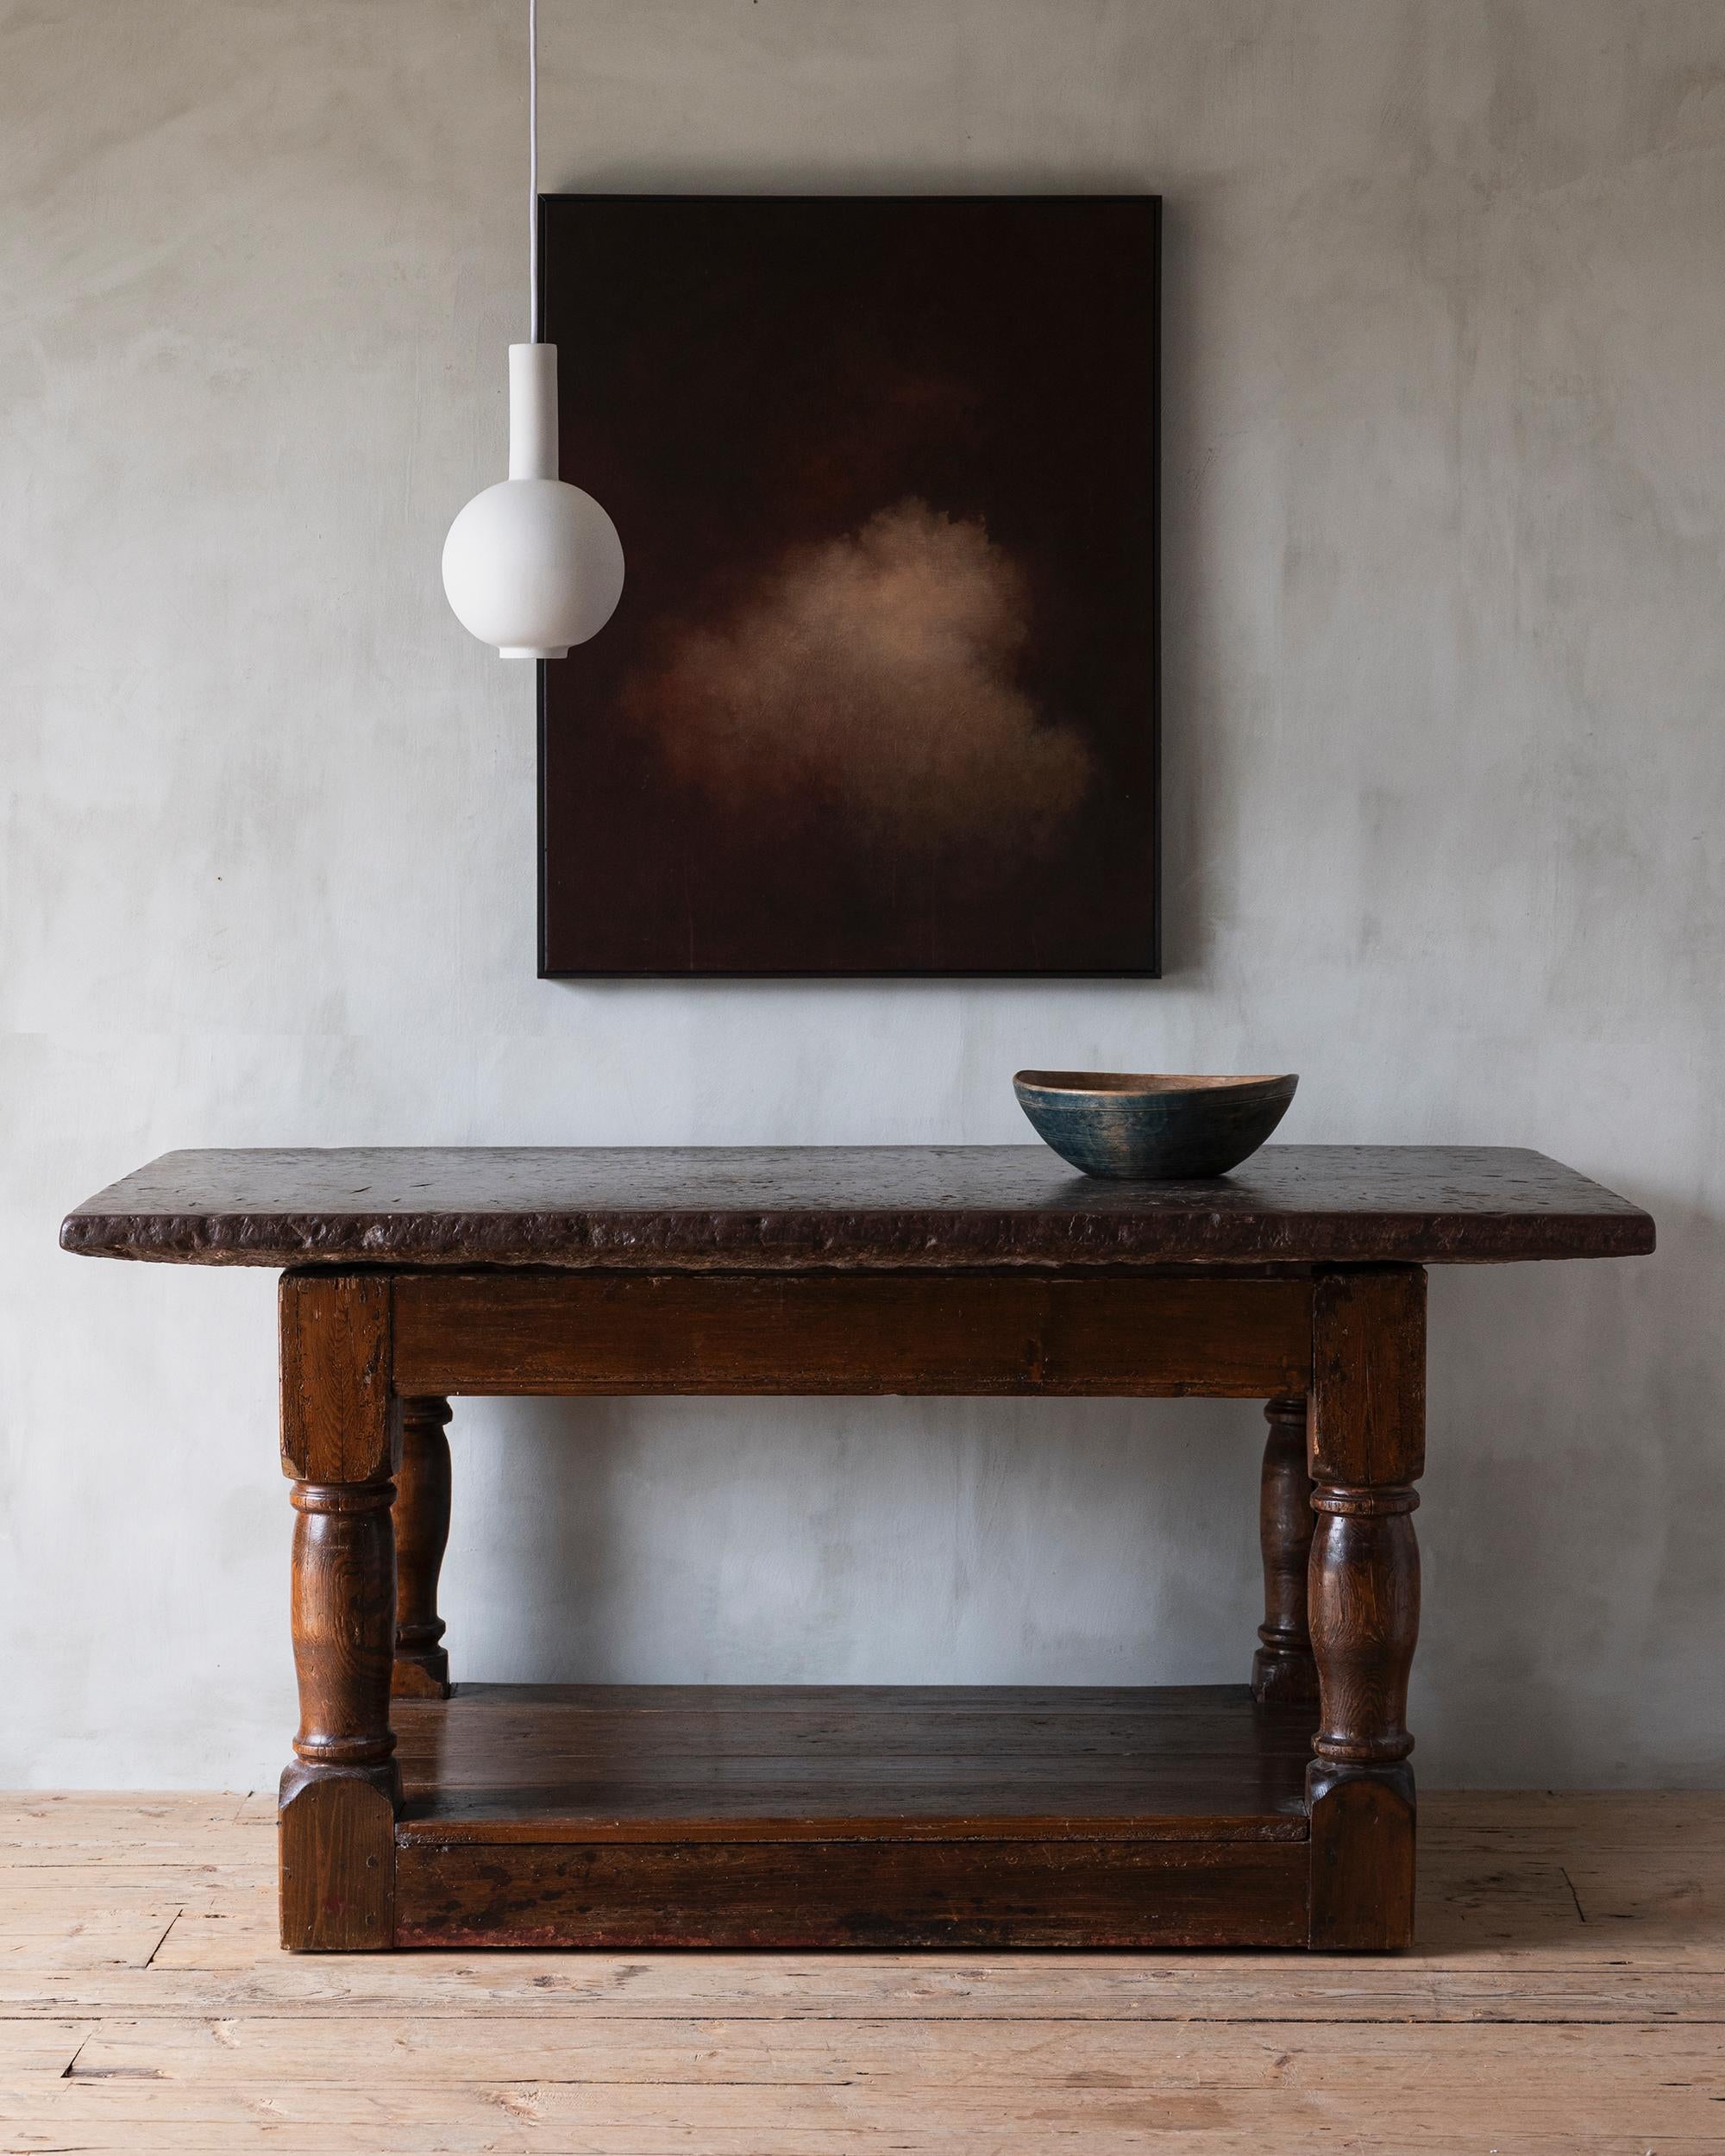 Fine and unusually large 18th century Swedish Baroque stone (Gotlands Stone) Table with amazing ware to the stone and nice patina on the wood. 